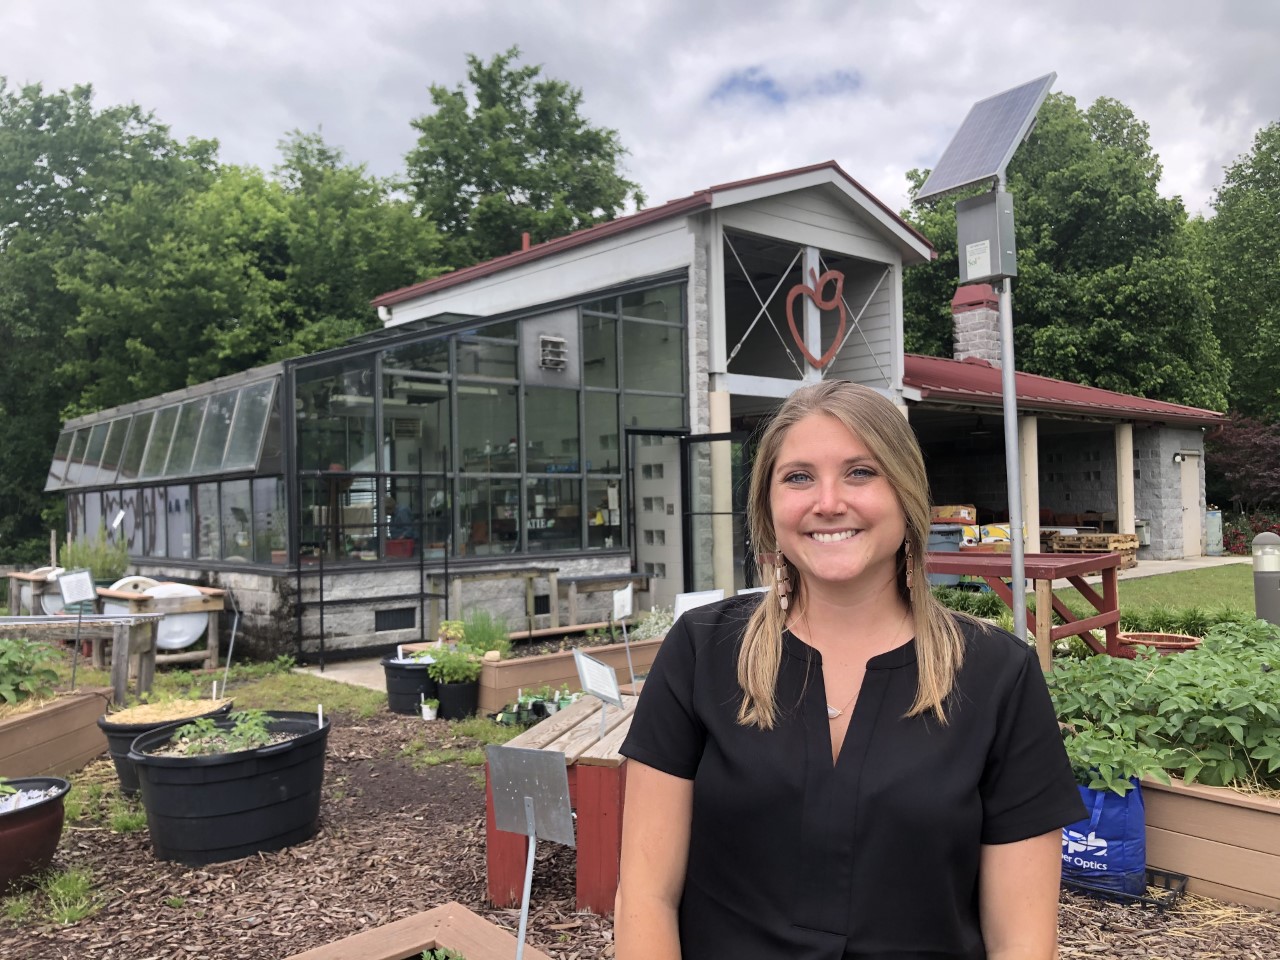 Abbey smiles at the camera. She is standing in front of a garden with a building in the background. The building has a greenhouse area and a sign on the front in the shape of an apple.